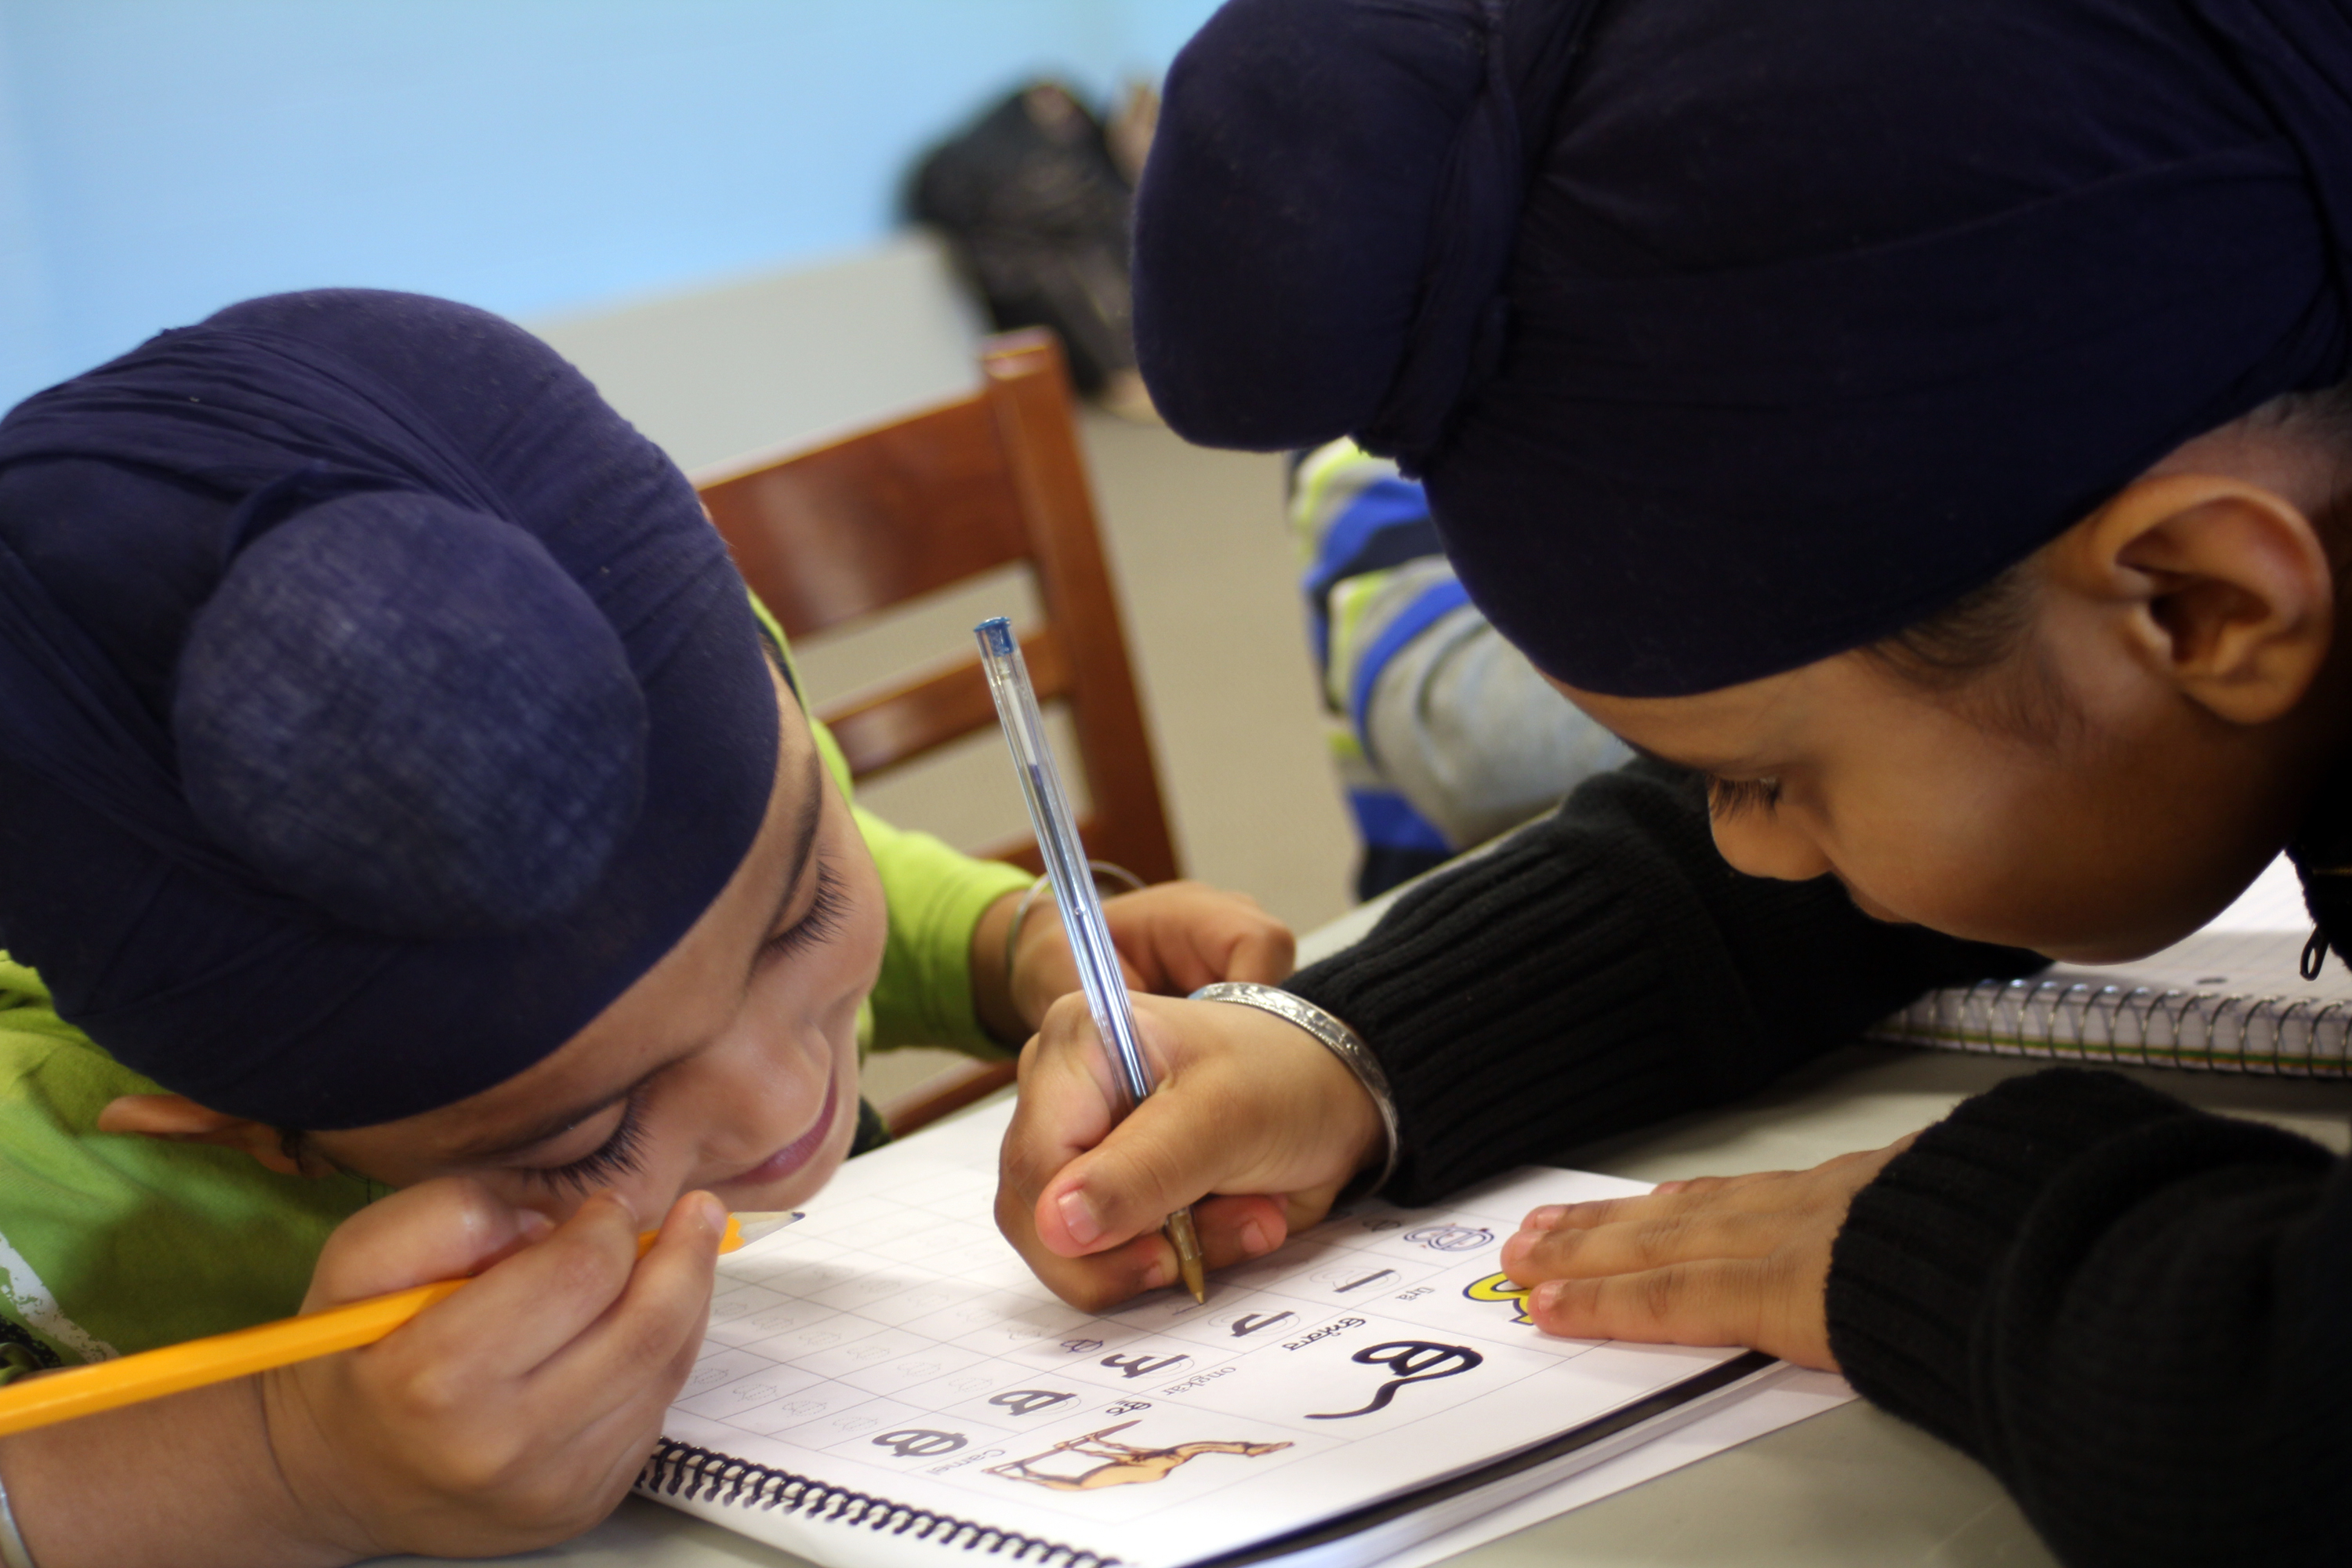 Downstairs in the basement, children work with their peers and teachers in Punjabi classes. The kids learn to read, write and speak the language.
Photo by: Aimee Katz